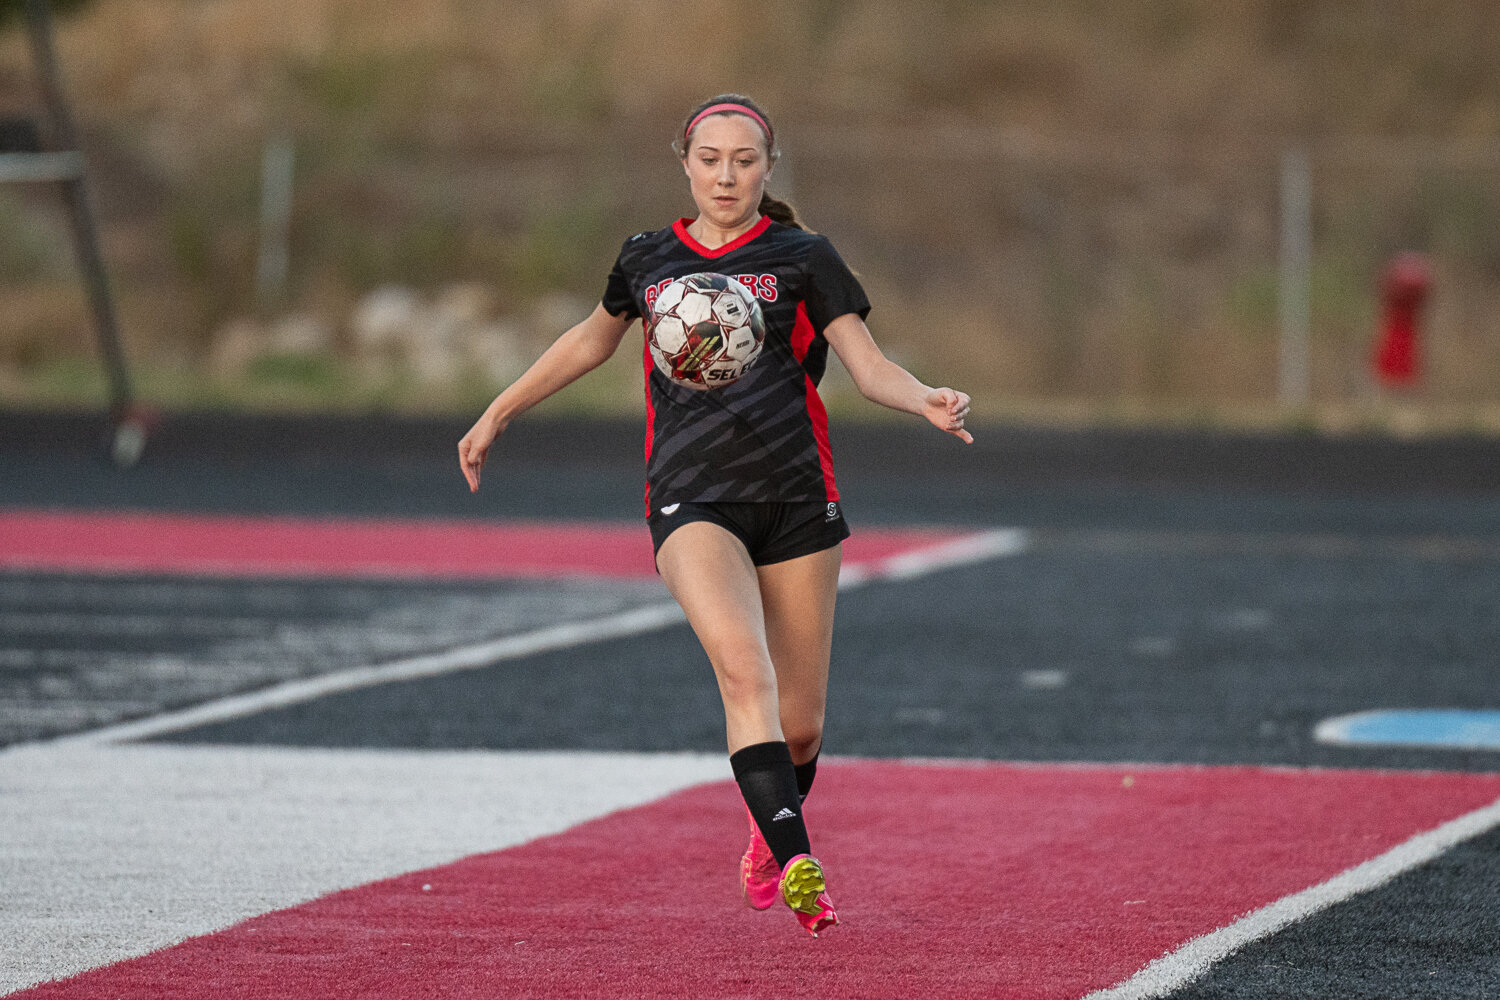 Abagail Archibald runs down a ball during Tenino's 0-0 draw against Adna, at home on Sept. 14.